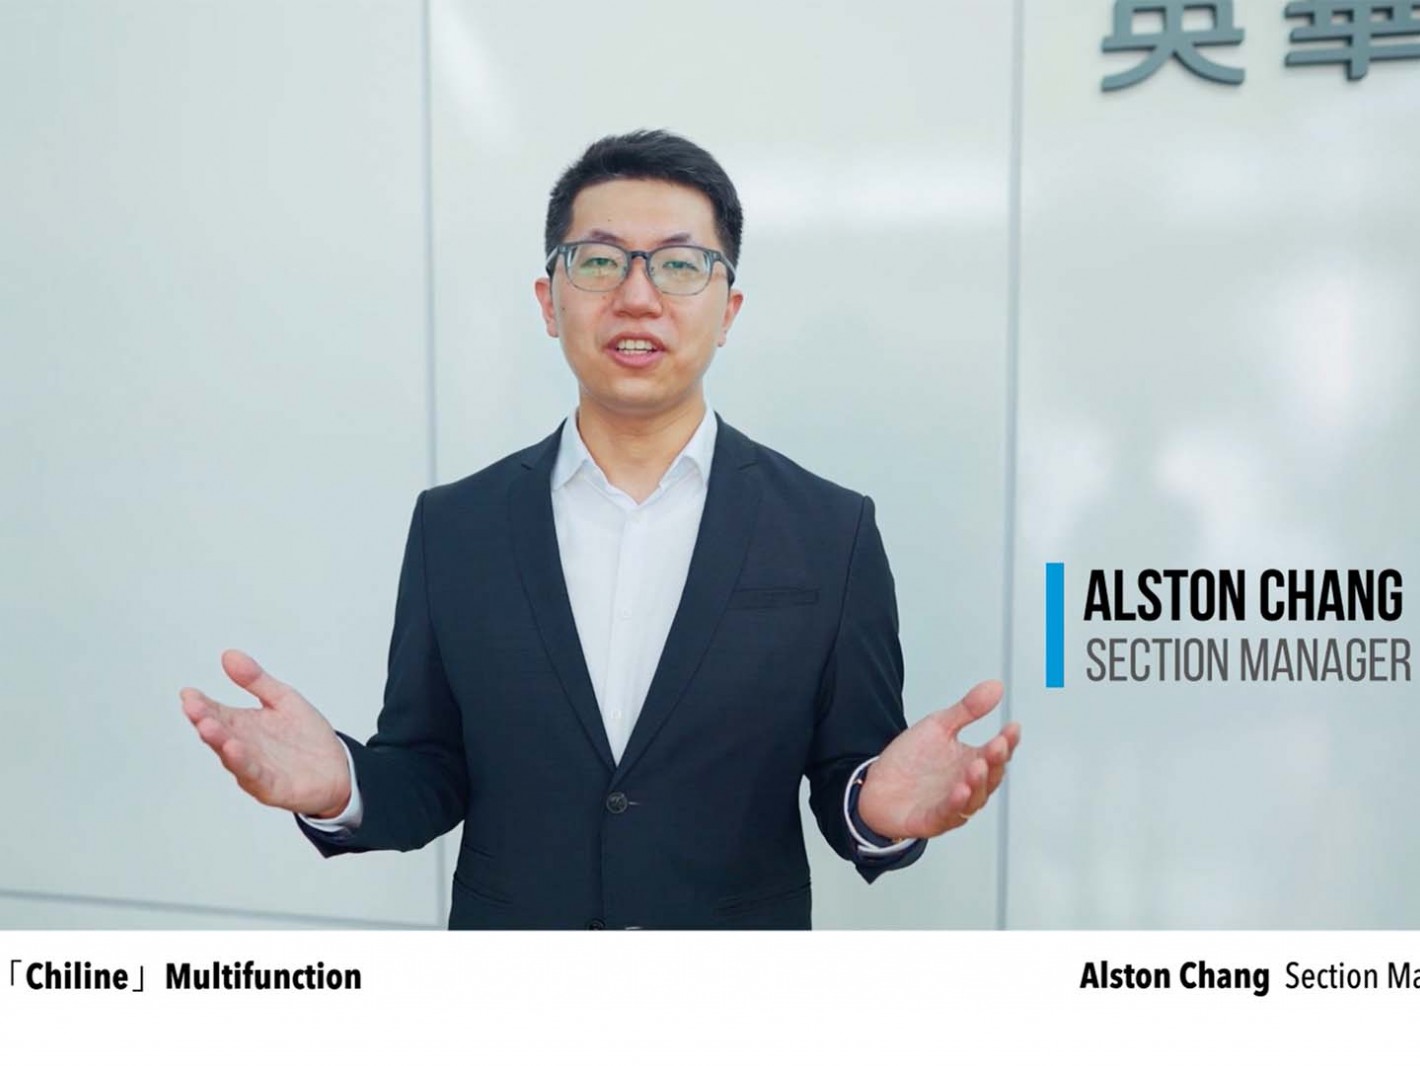 Alston Chang, Section Manager, Inventec Appliances Corp. spoke on the subject of ”Chiline Multifunction.